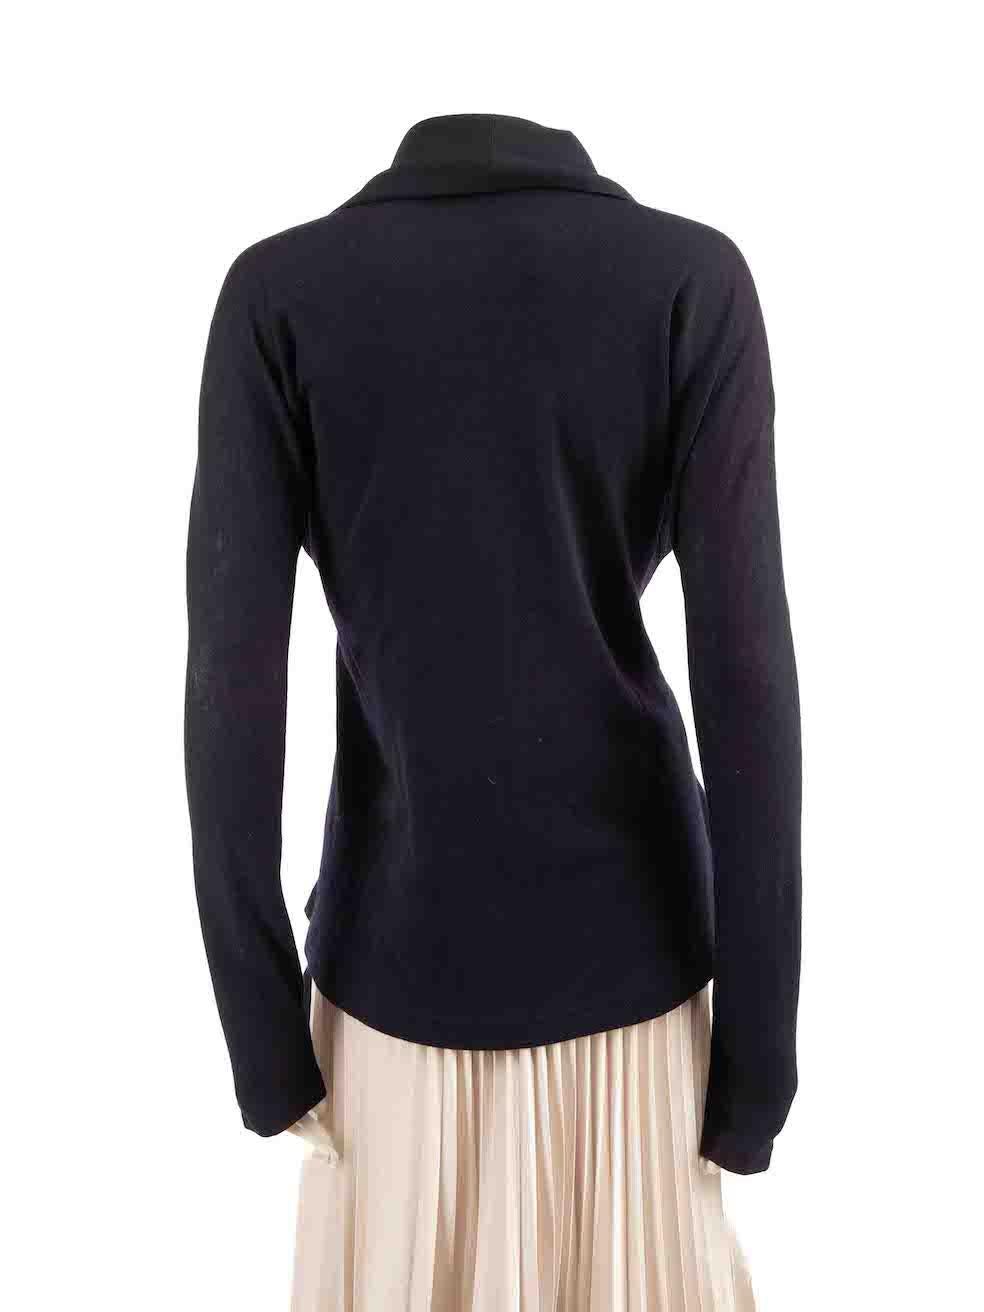 Yohji Yamamoto Navy & Black Knitted Panel Jacket Size L In Good Condition For Sale In London, GB